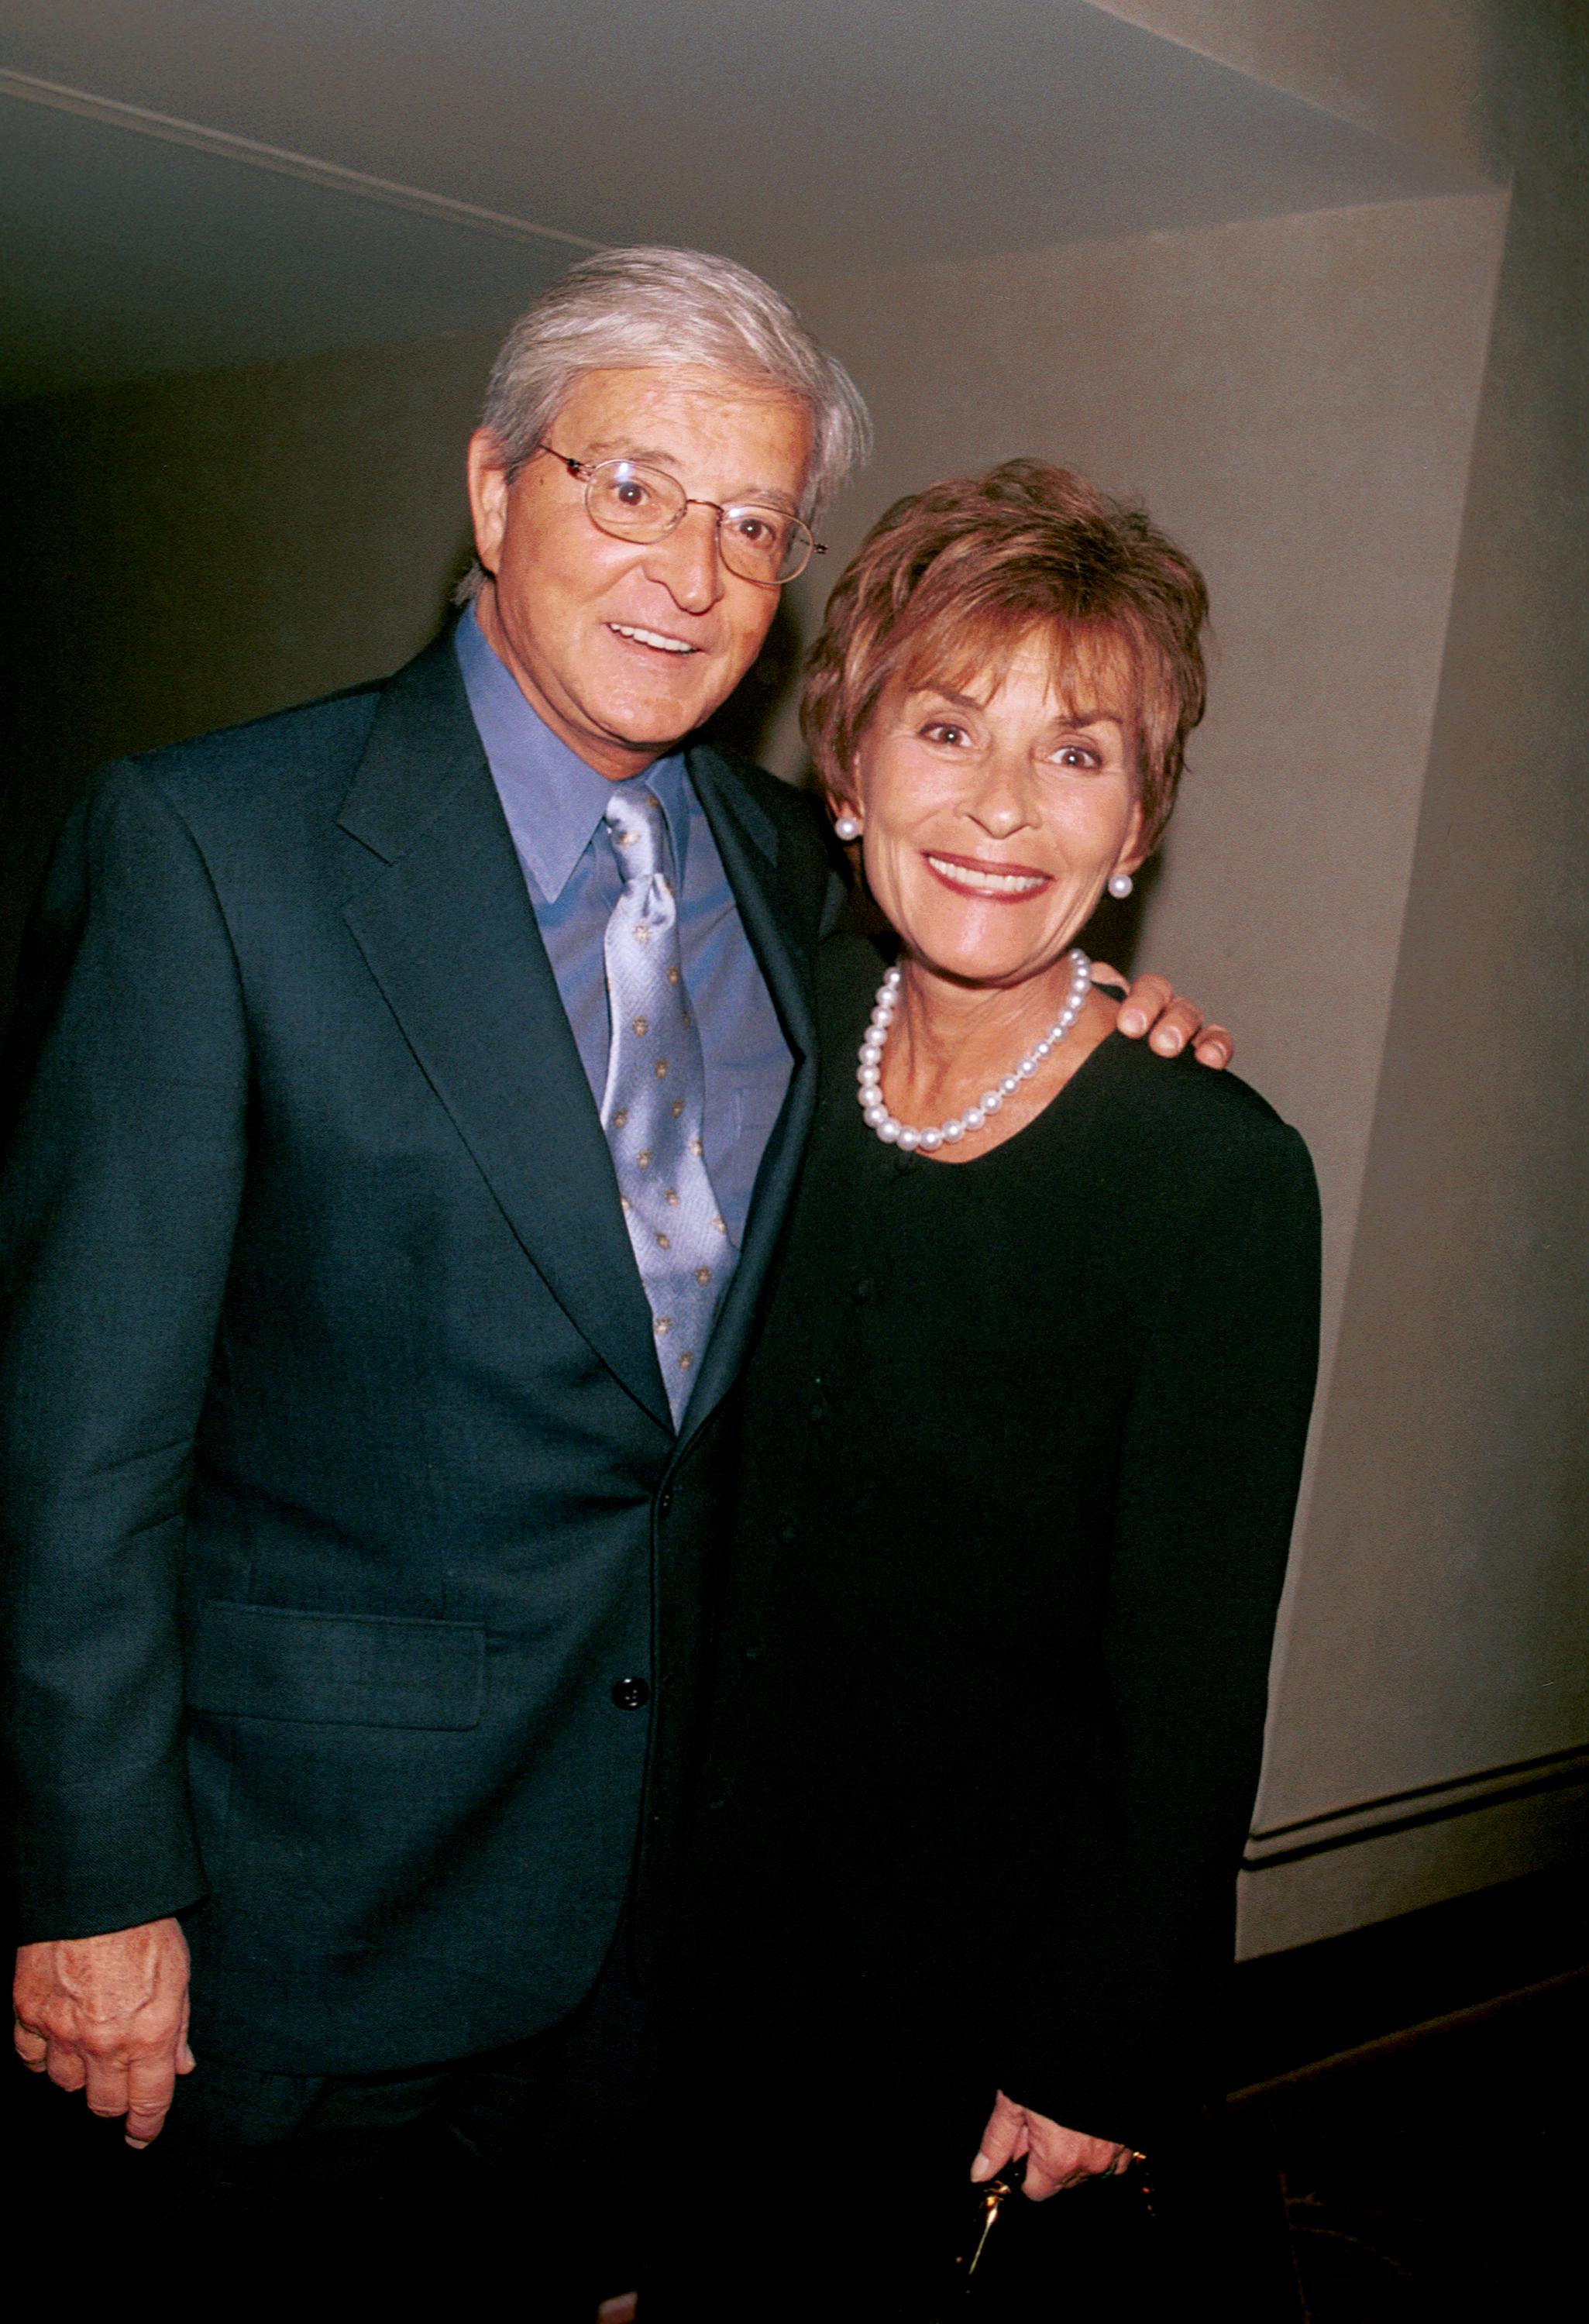 Judges Jerry and Judy Sheindlin at Merv Griffin's Coconut Club for a special performance by Polly Bergen, prior to her opening on Broadway in "Follies," January 13, 2001 in Beverly Hills, CA. | Source: Getty Images